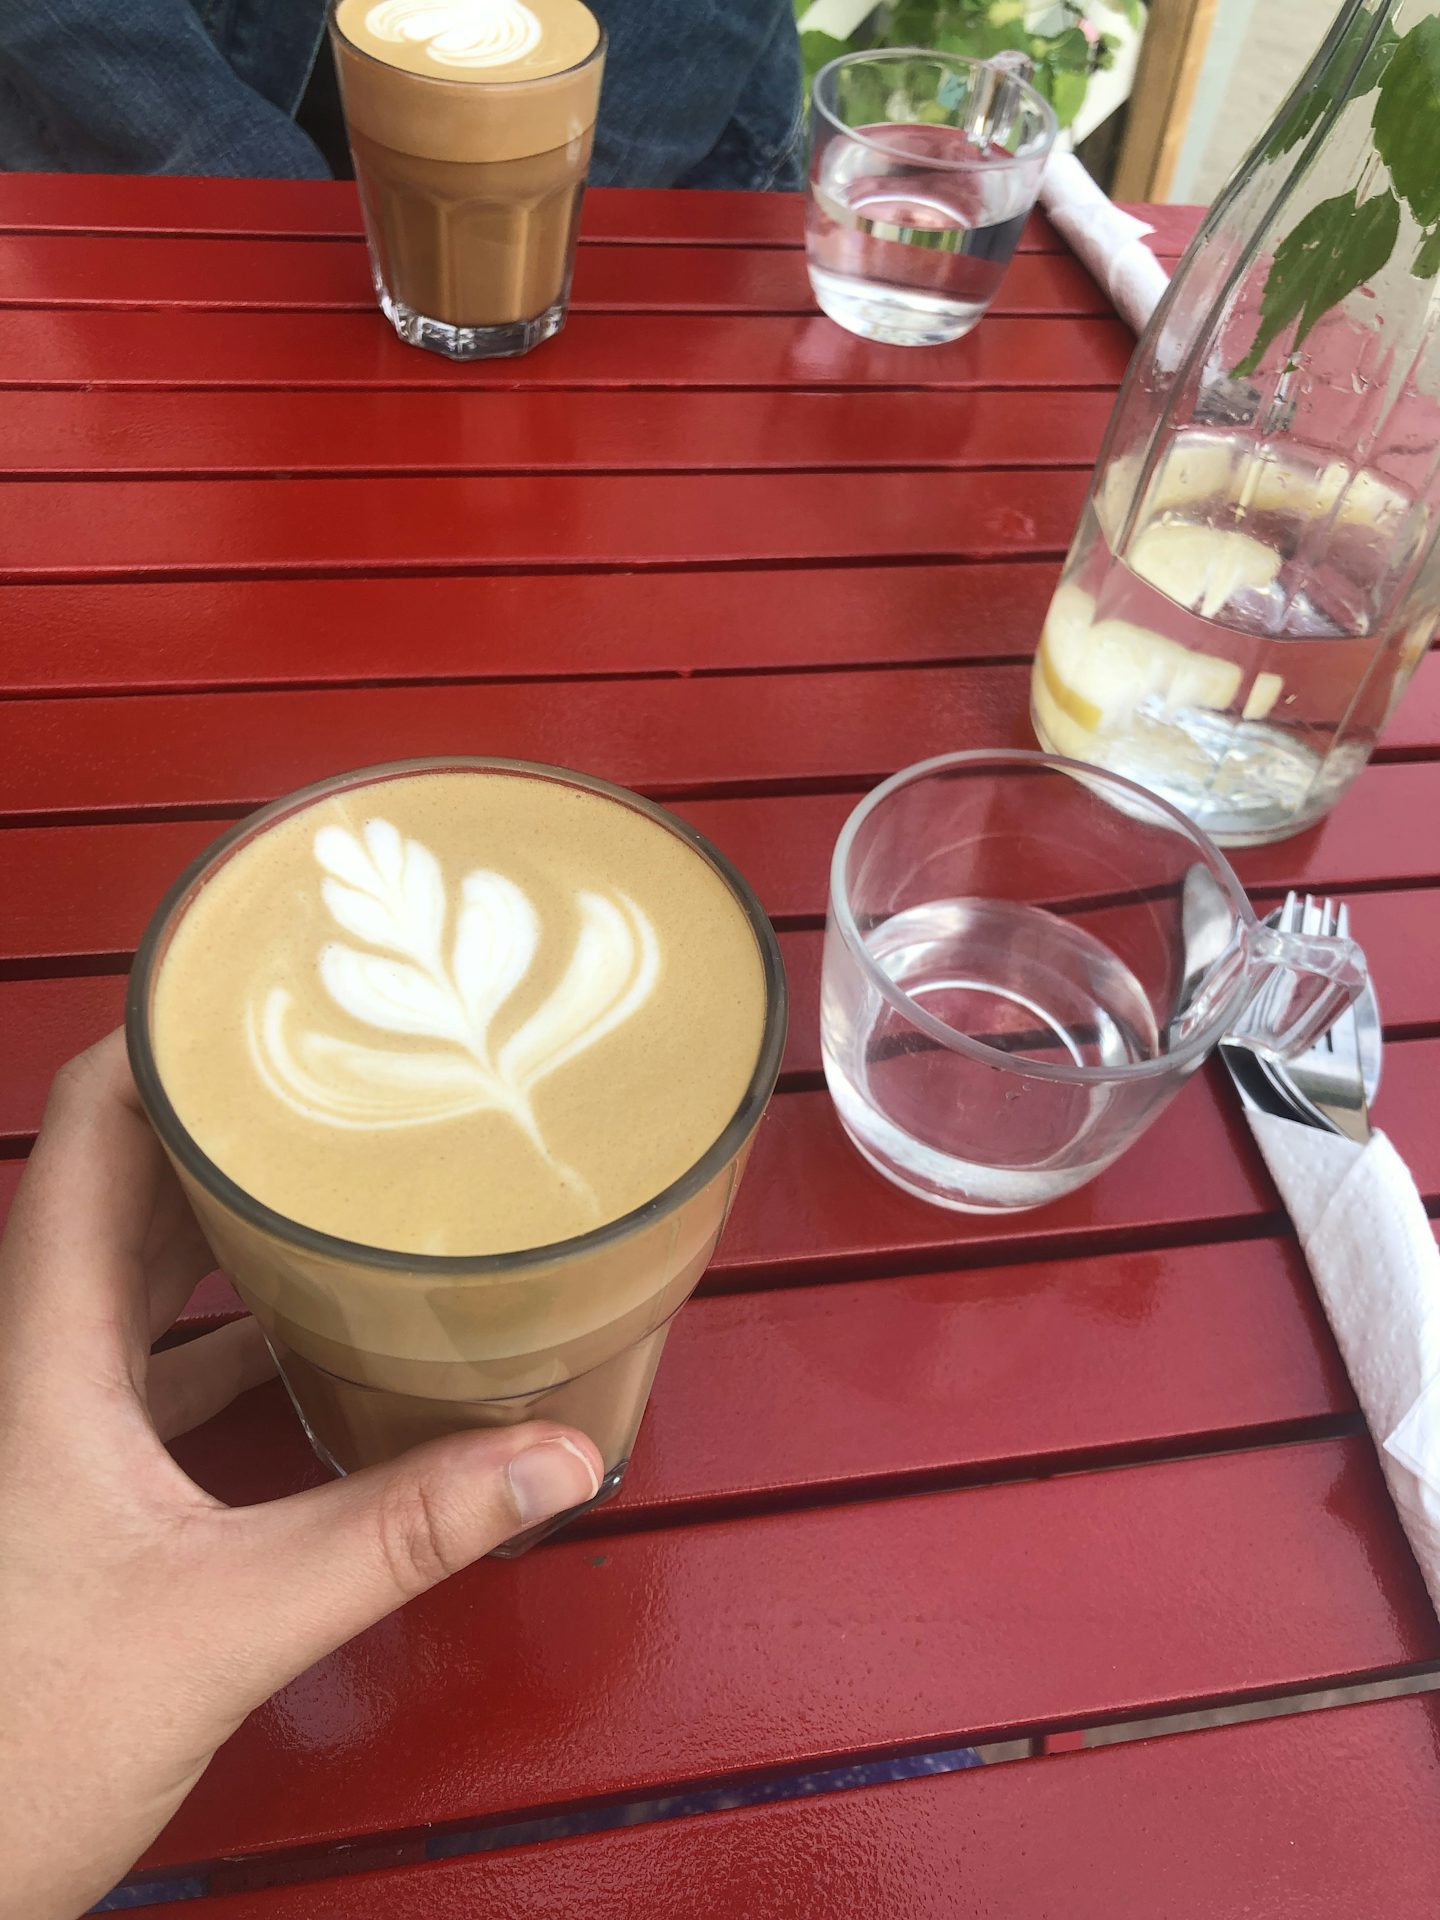 We recently got to visit Leni Poki, an adorable new café in Leslievill